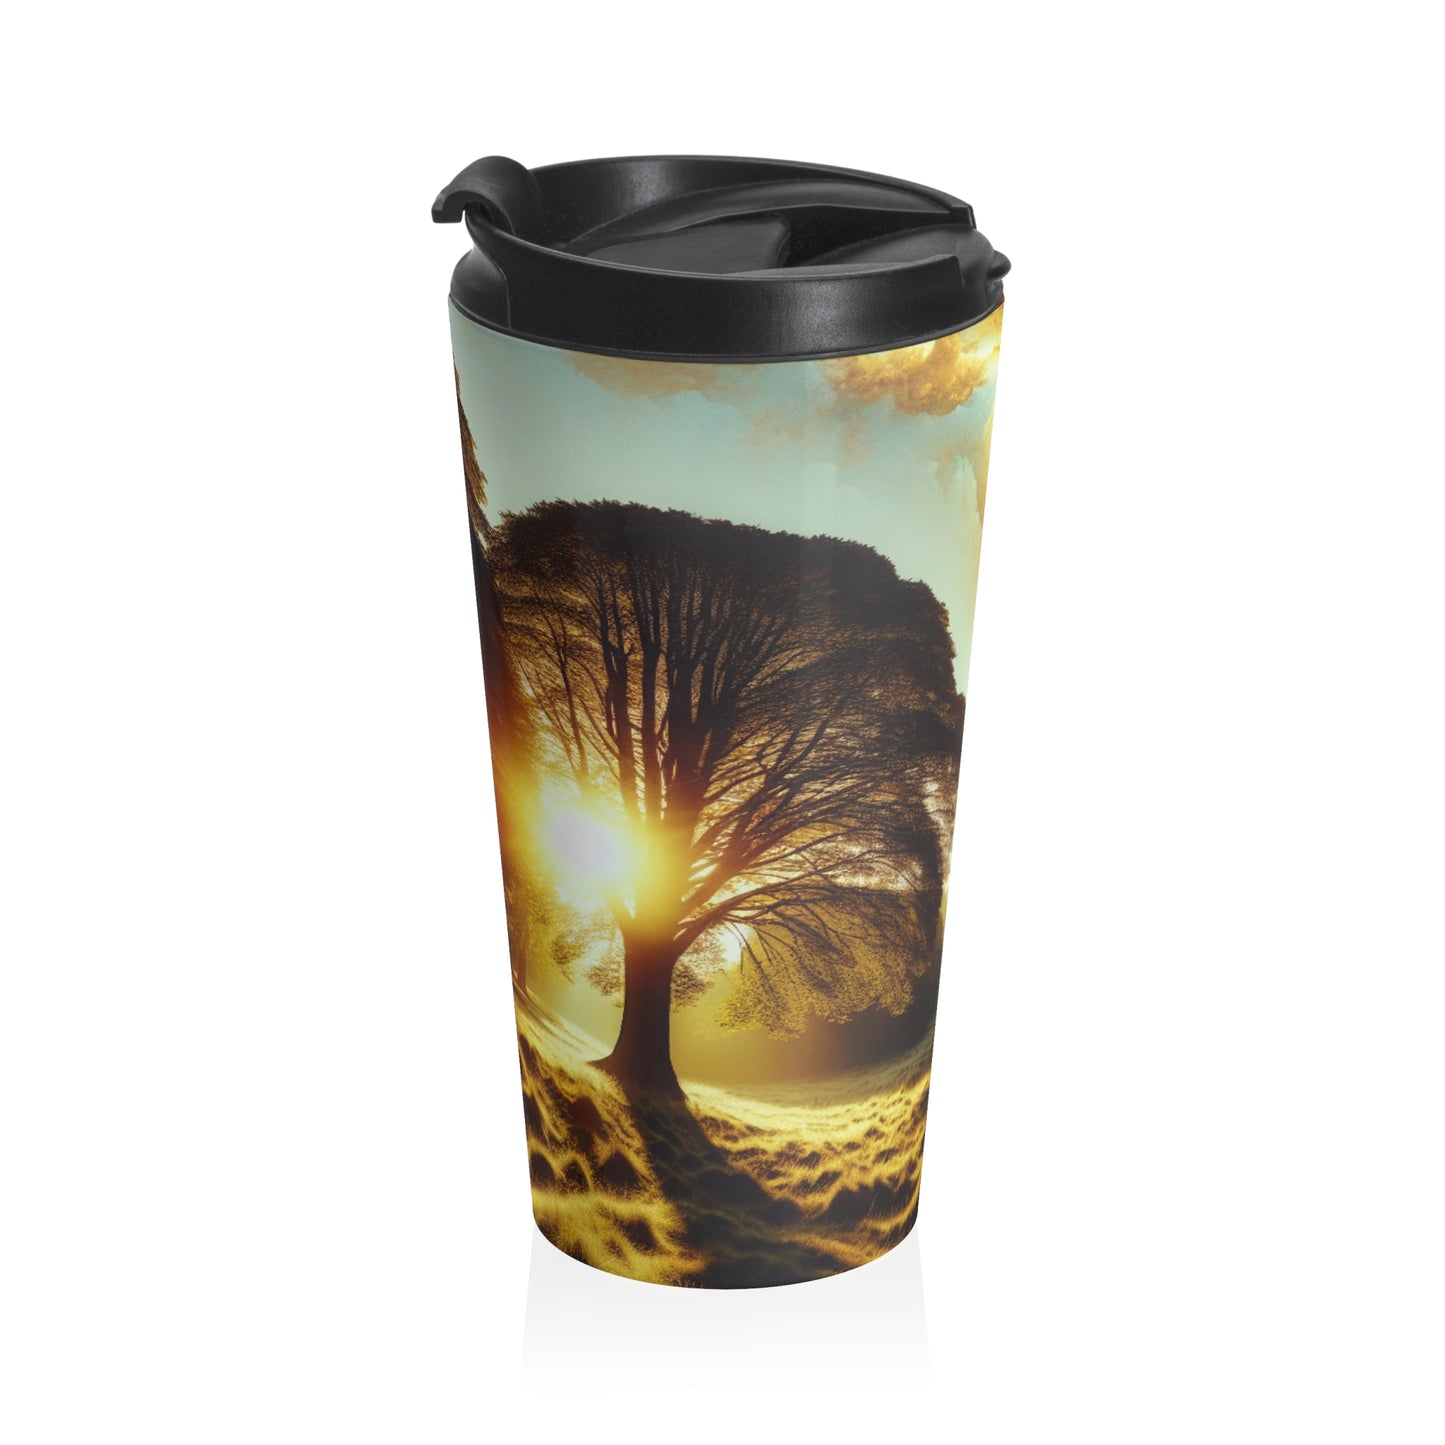 "Rebirth of the Forest: A Recycled Ecosystem" - The Alien Stainless Steel Travel Mug Environmental Art